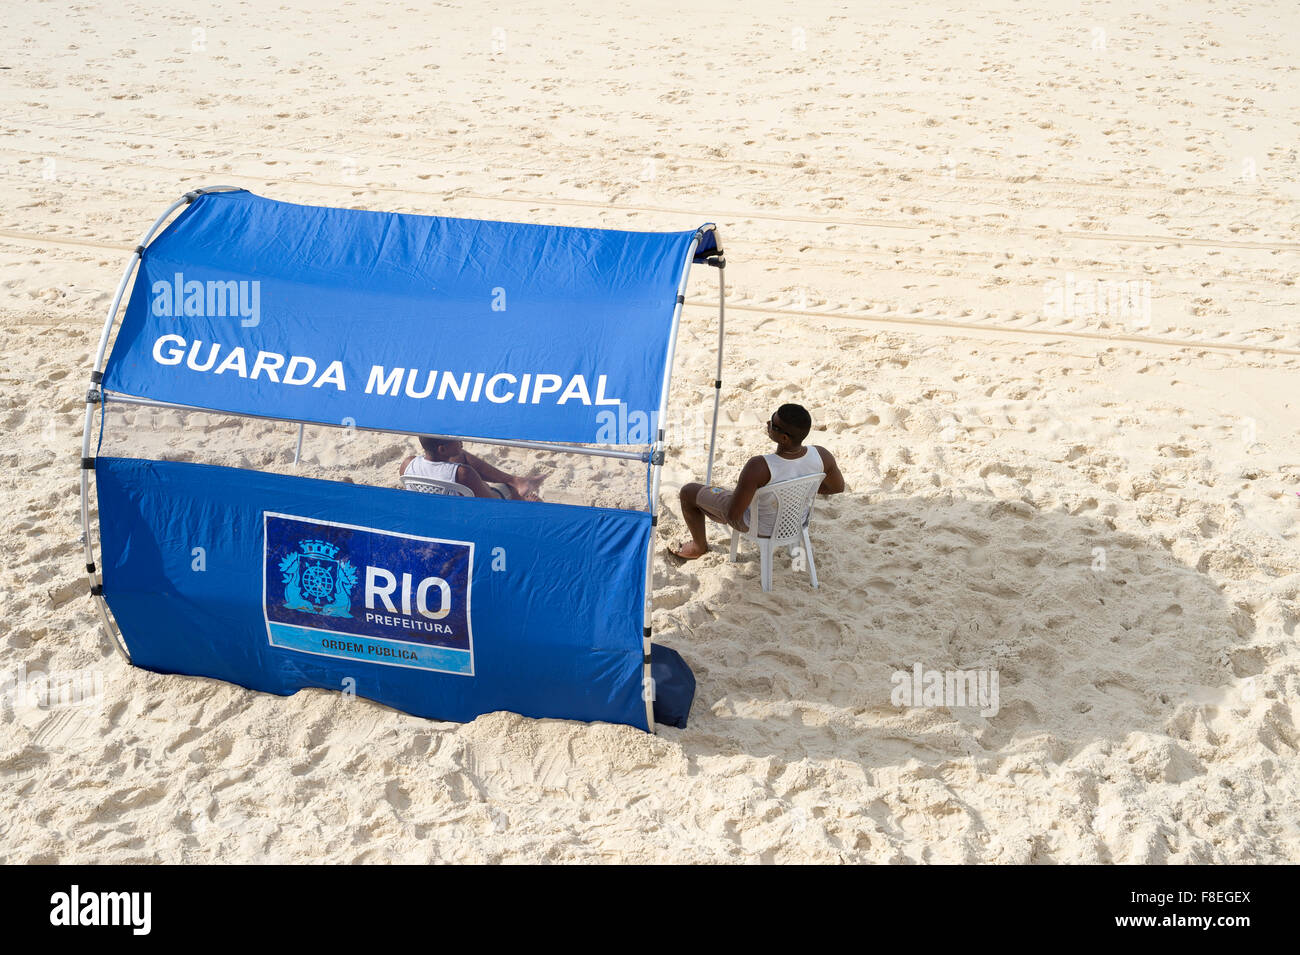 RIO DE JANEIRO, BRAZIL - OCTOBER 22, 2015: Tent for the Guarda Municipal, a city security force, stands on Ipanema Beach. Stock Photo